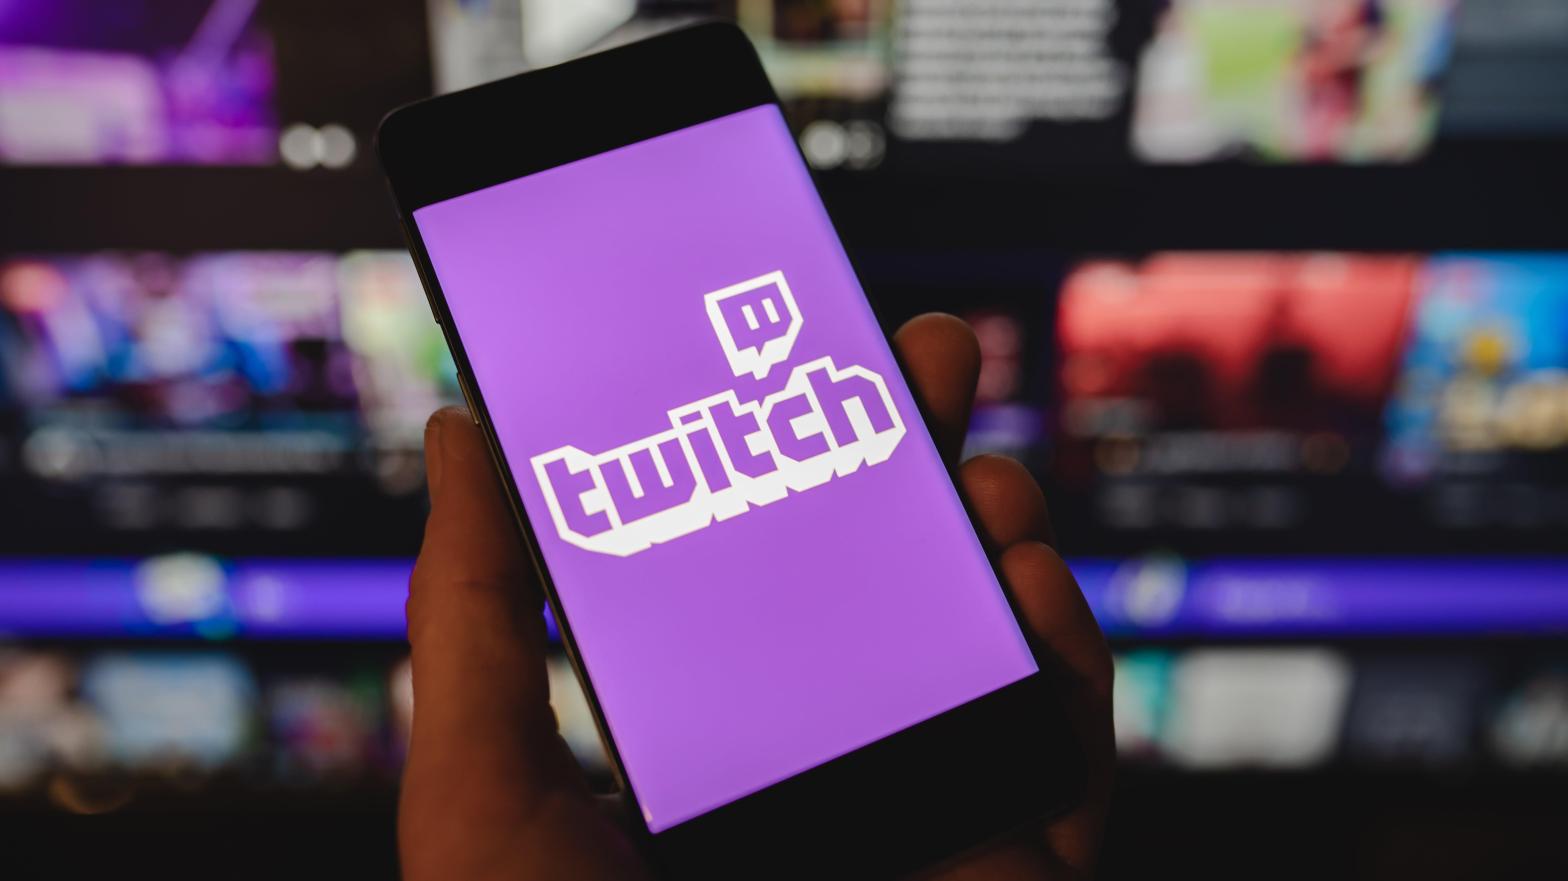 Past reports cited that major overseas crypto casinos were being promoted on multiple Twitch streams, but it seems gambling issues on the platform reach even deeper than that.  (Photo: salarko, Shutterstock)